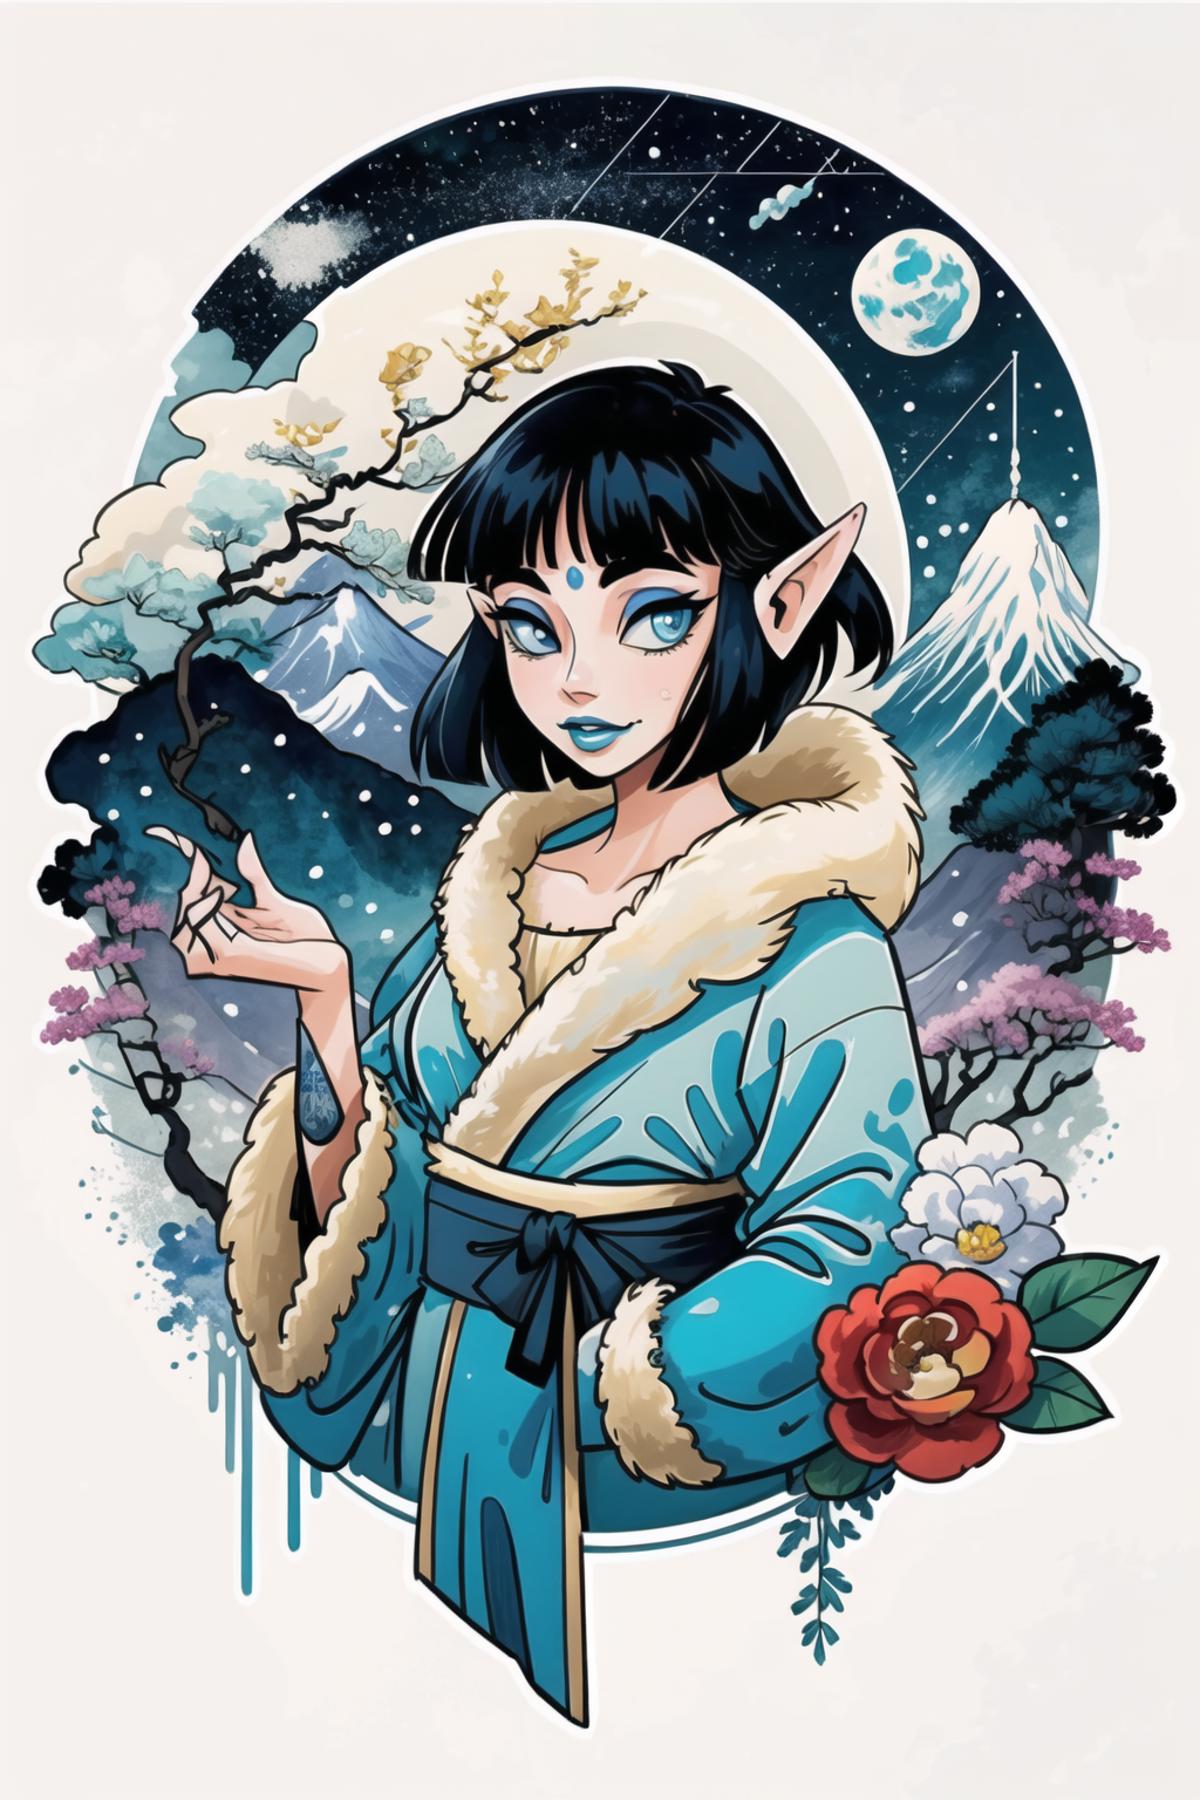 Taelia, Snow Faerie - Neopets image by FaeFlan